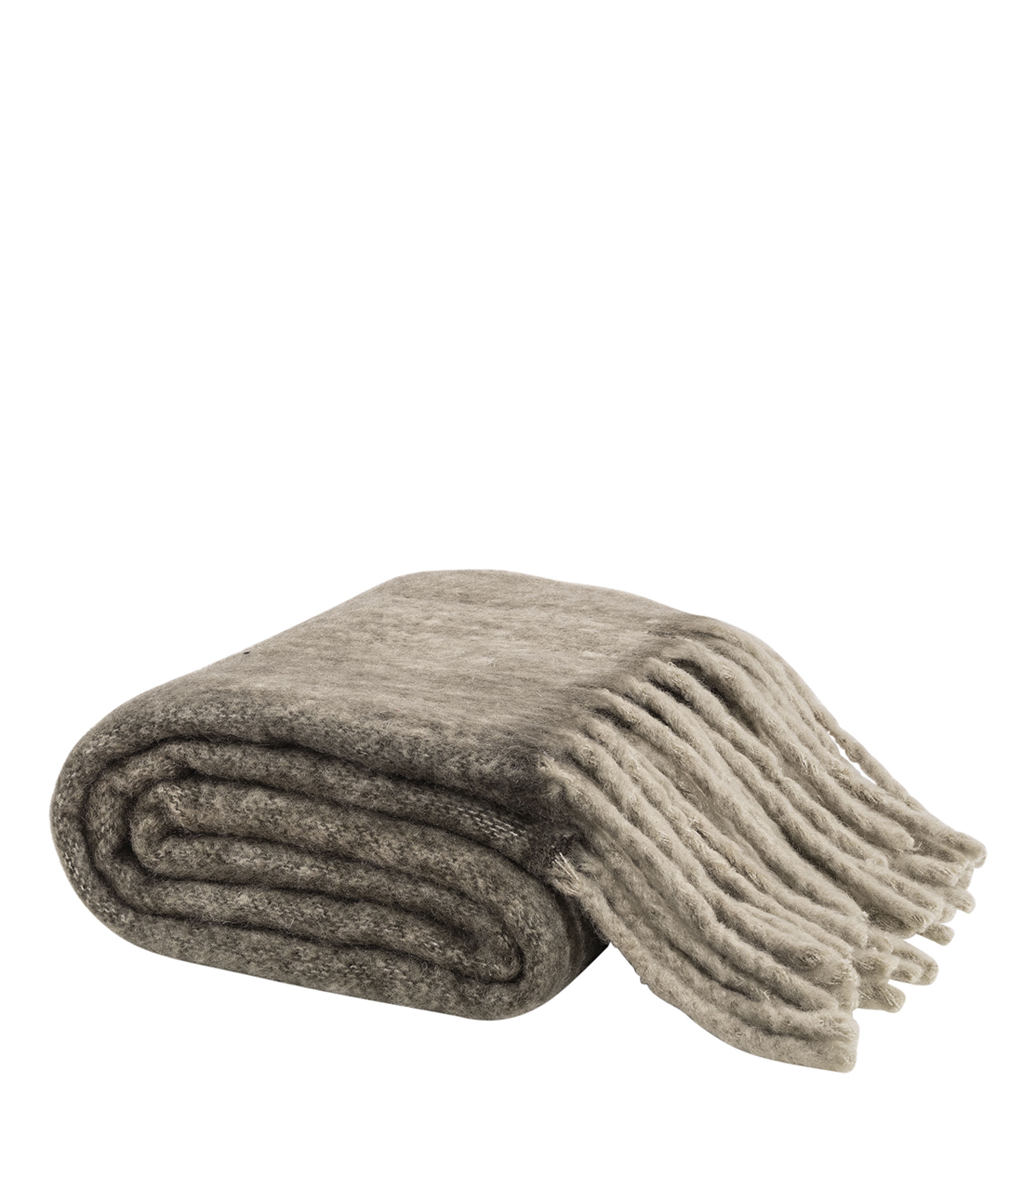 ARTWOOD COSY Throw - Taupe, 130x170cm